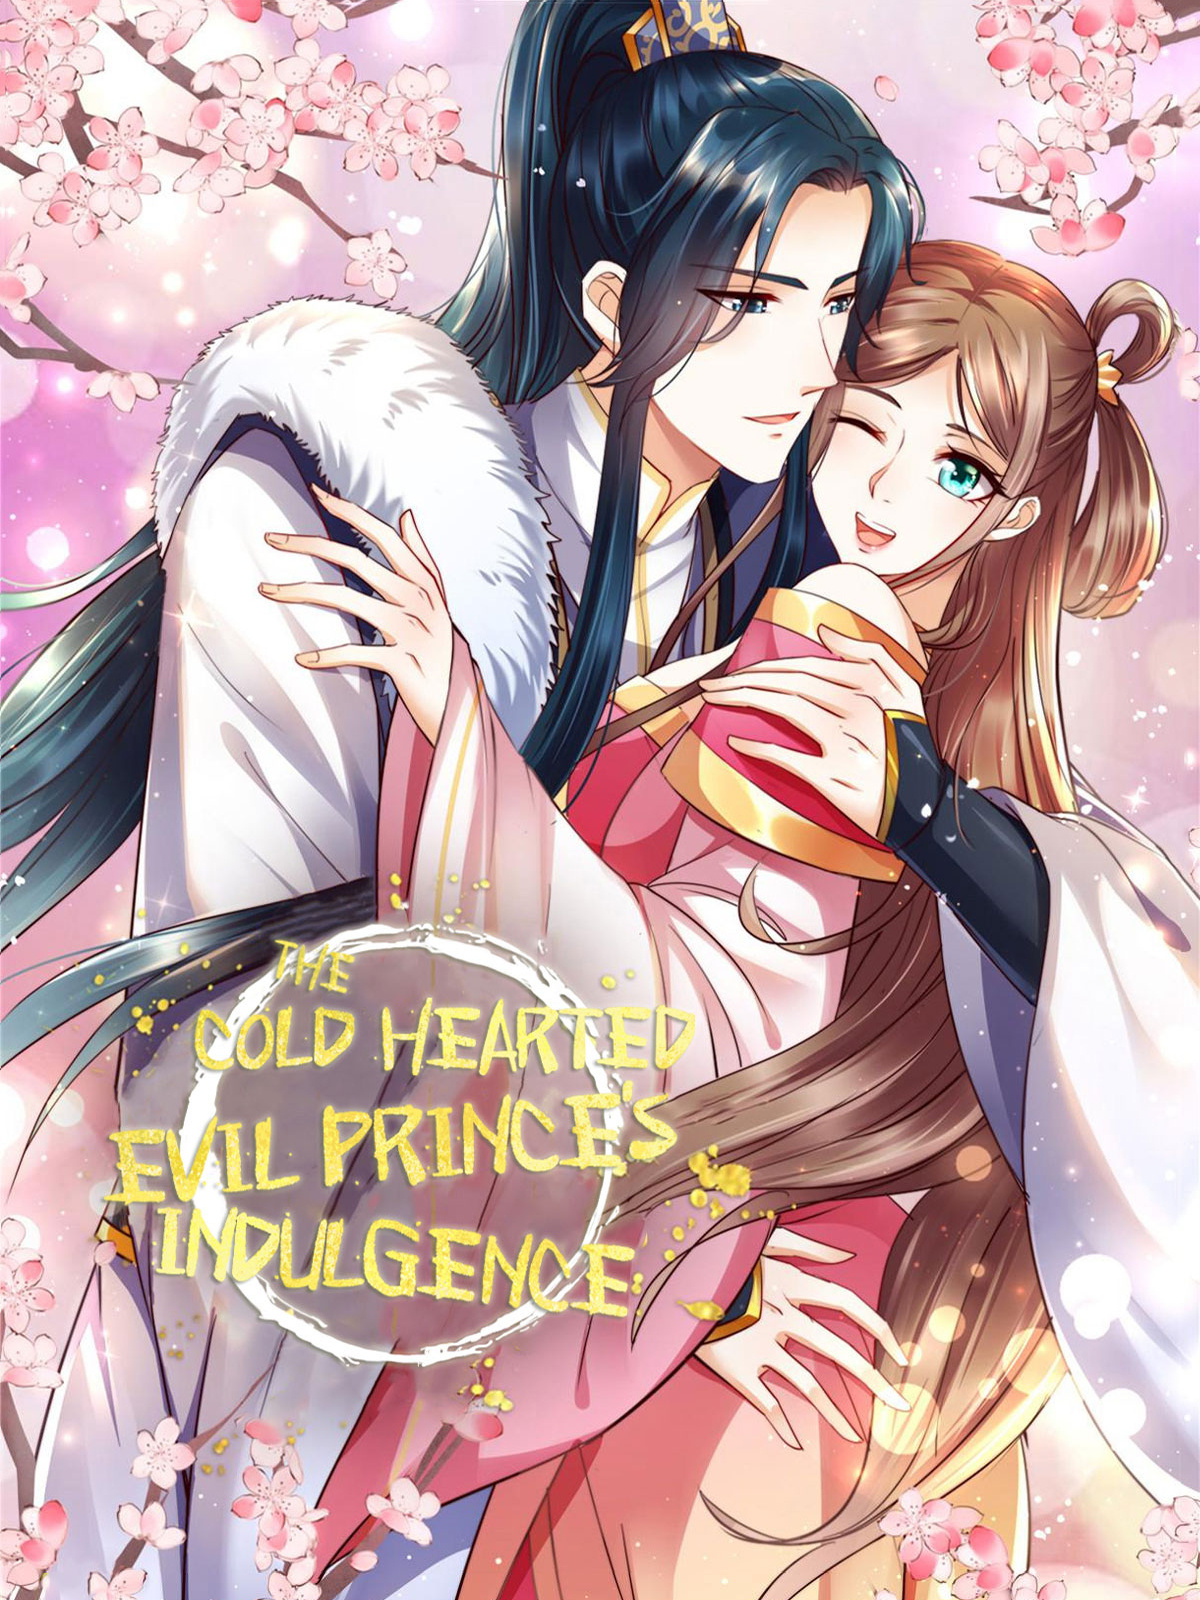 The Cold-Hearted Evil Prince's Indulgence 141